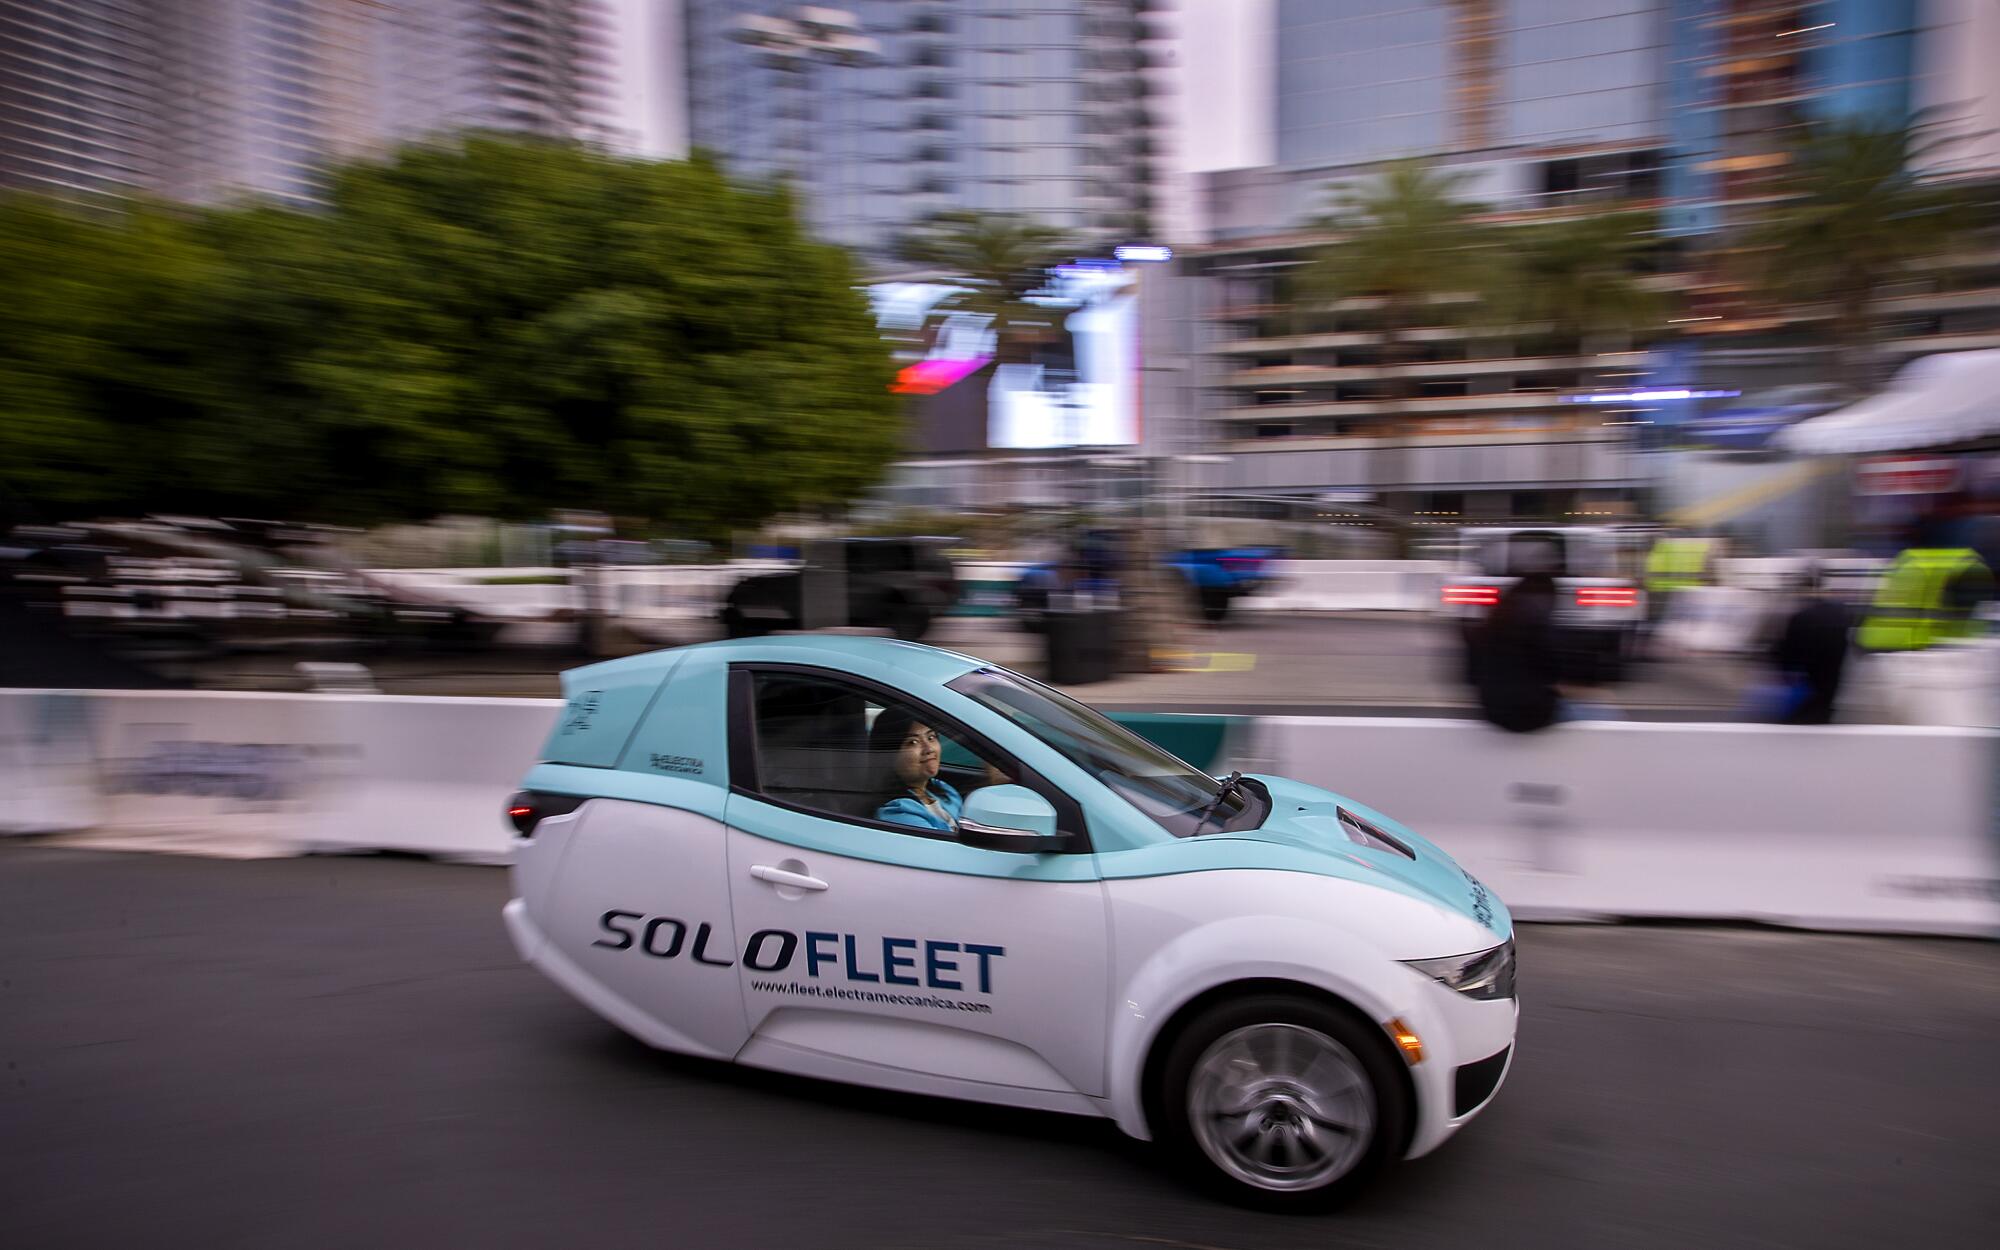 A visitor to the L.A. Auto Show test-drives a SOLO electric vehicle.